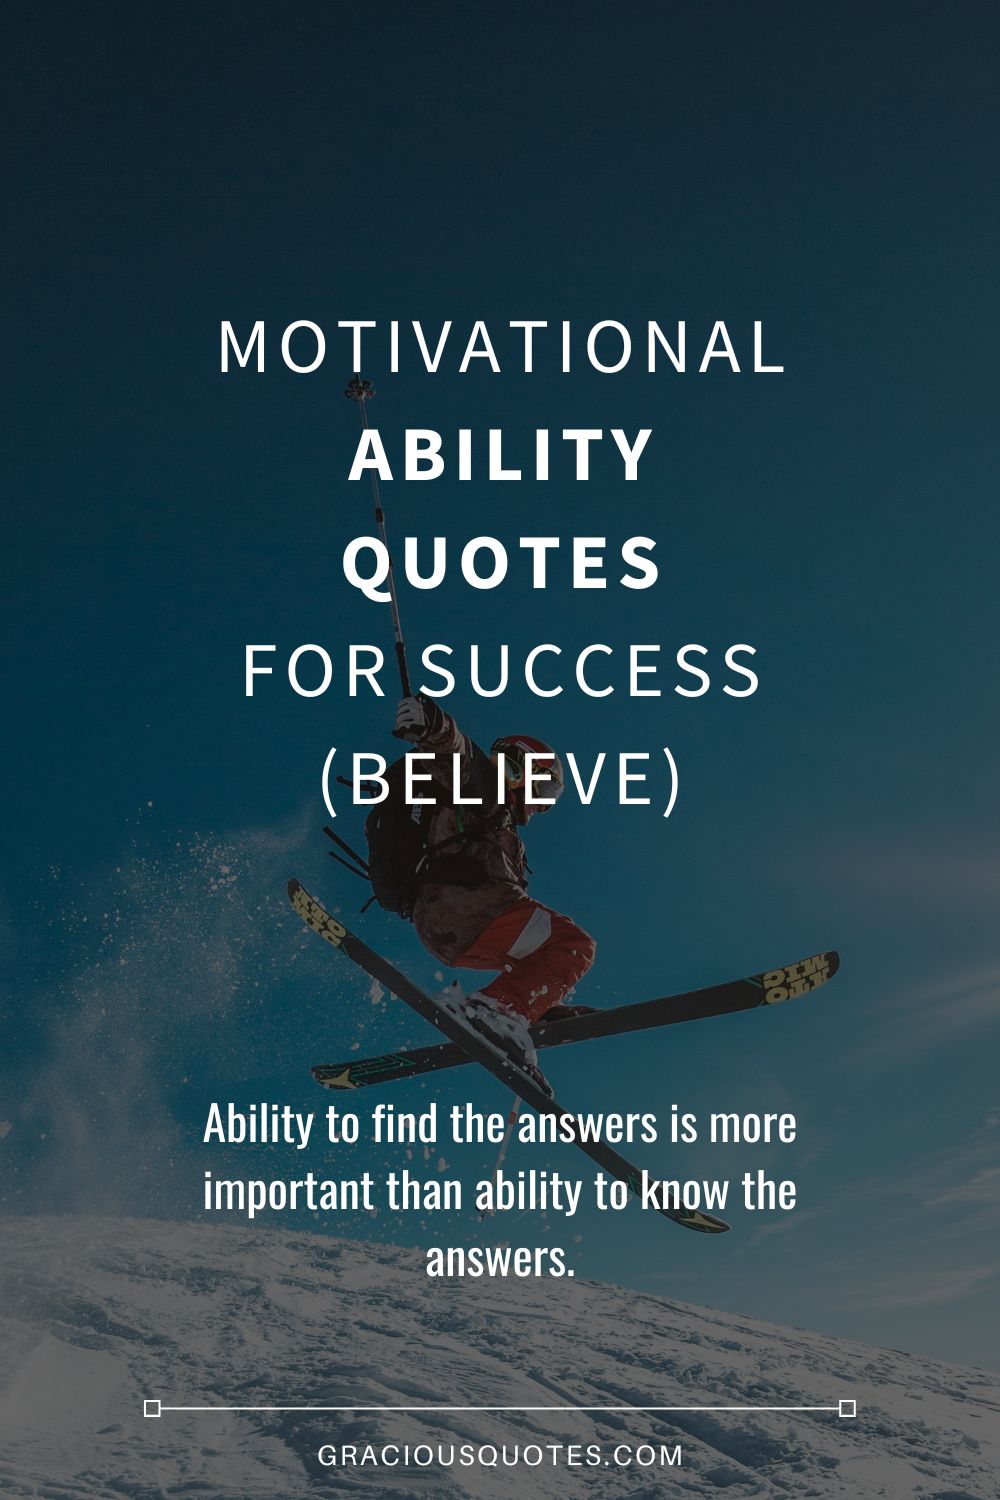 Motivational Ability Quotes for Success (BELIEVE) - Gracious Quotes